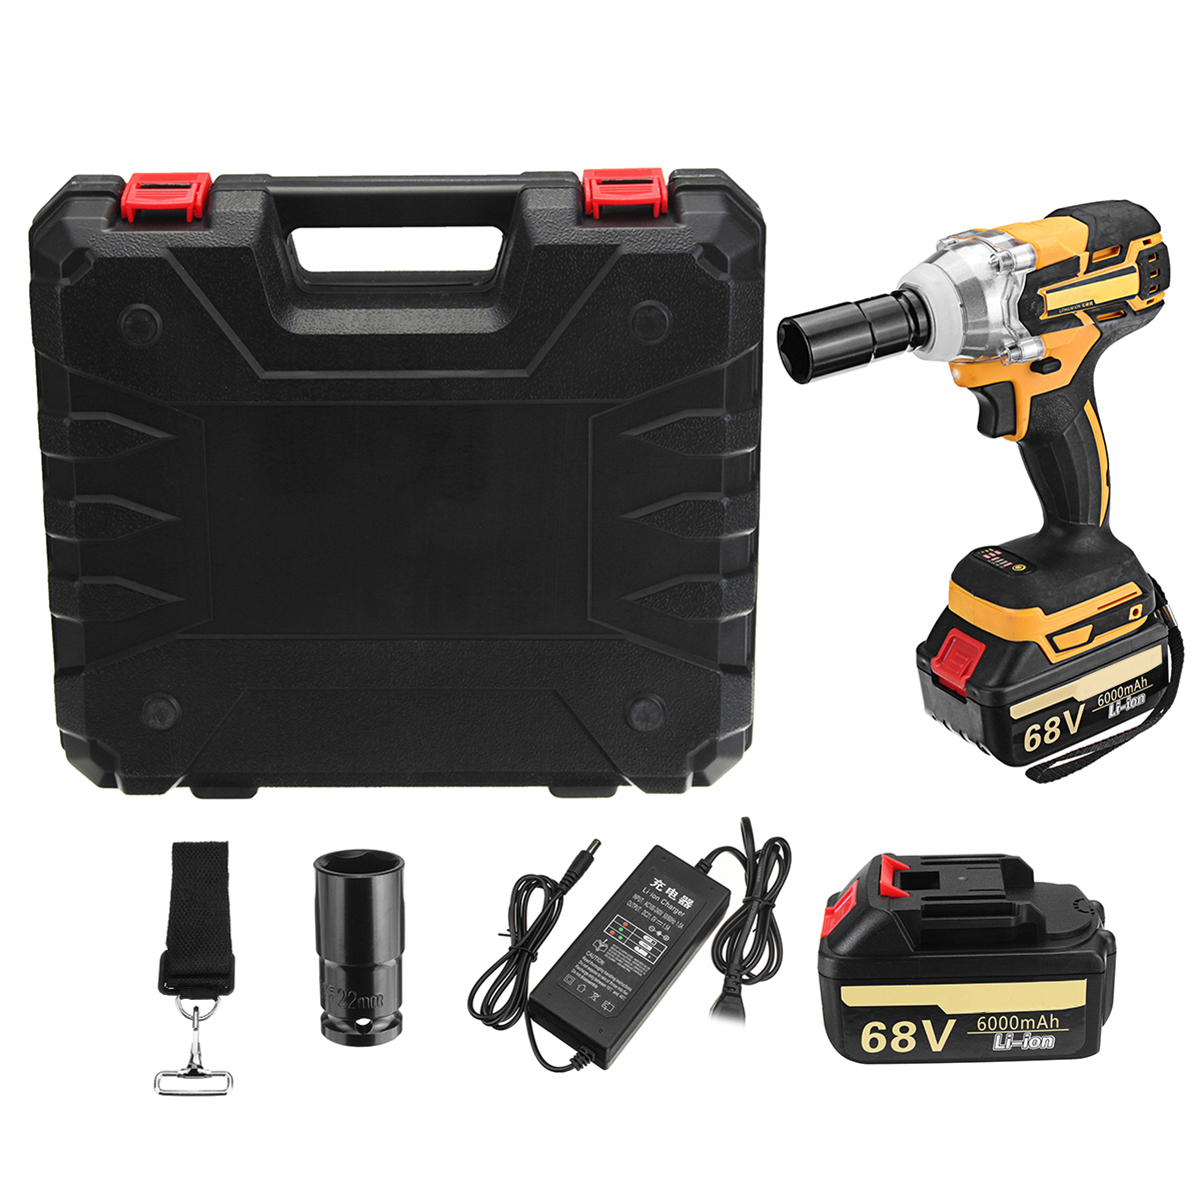 68V-6000mAh-Electric-Wrench-2-Batteries-1-Charger-Brushless-Cordless-Drive-Impact-Wrench-Tools-1282965-3